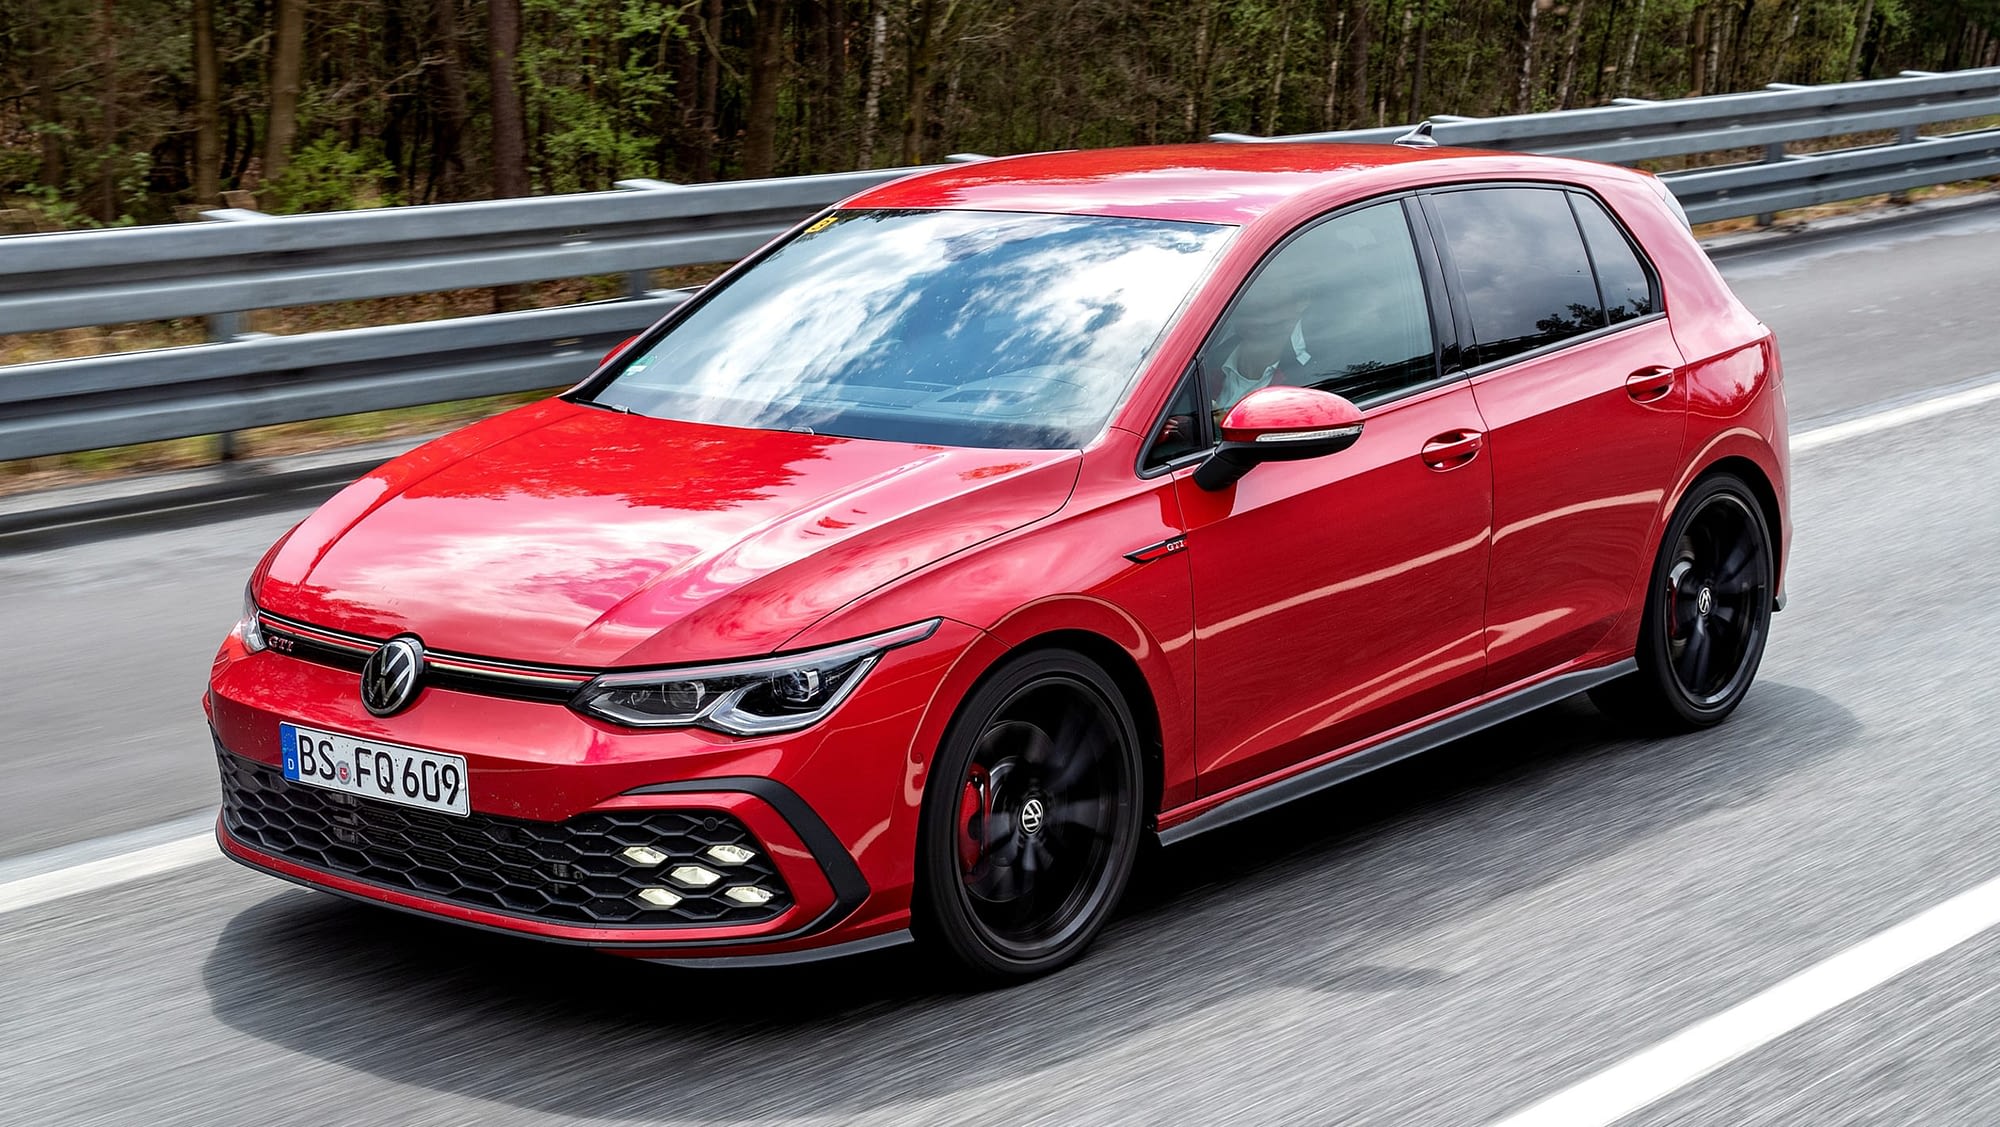 2020 Mk8 Volkswagen Golf GTI ride review Automotive Daily